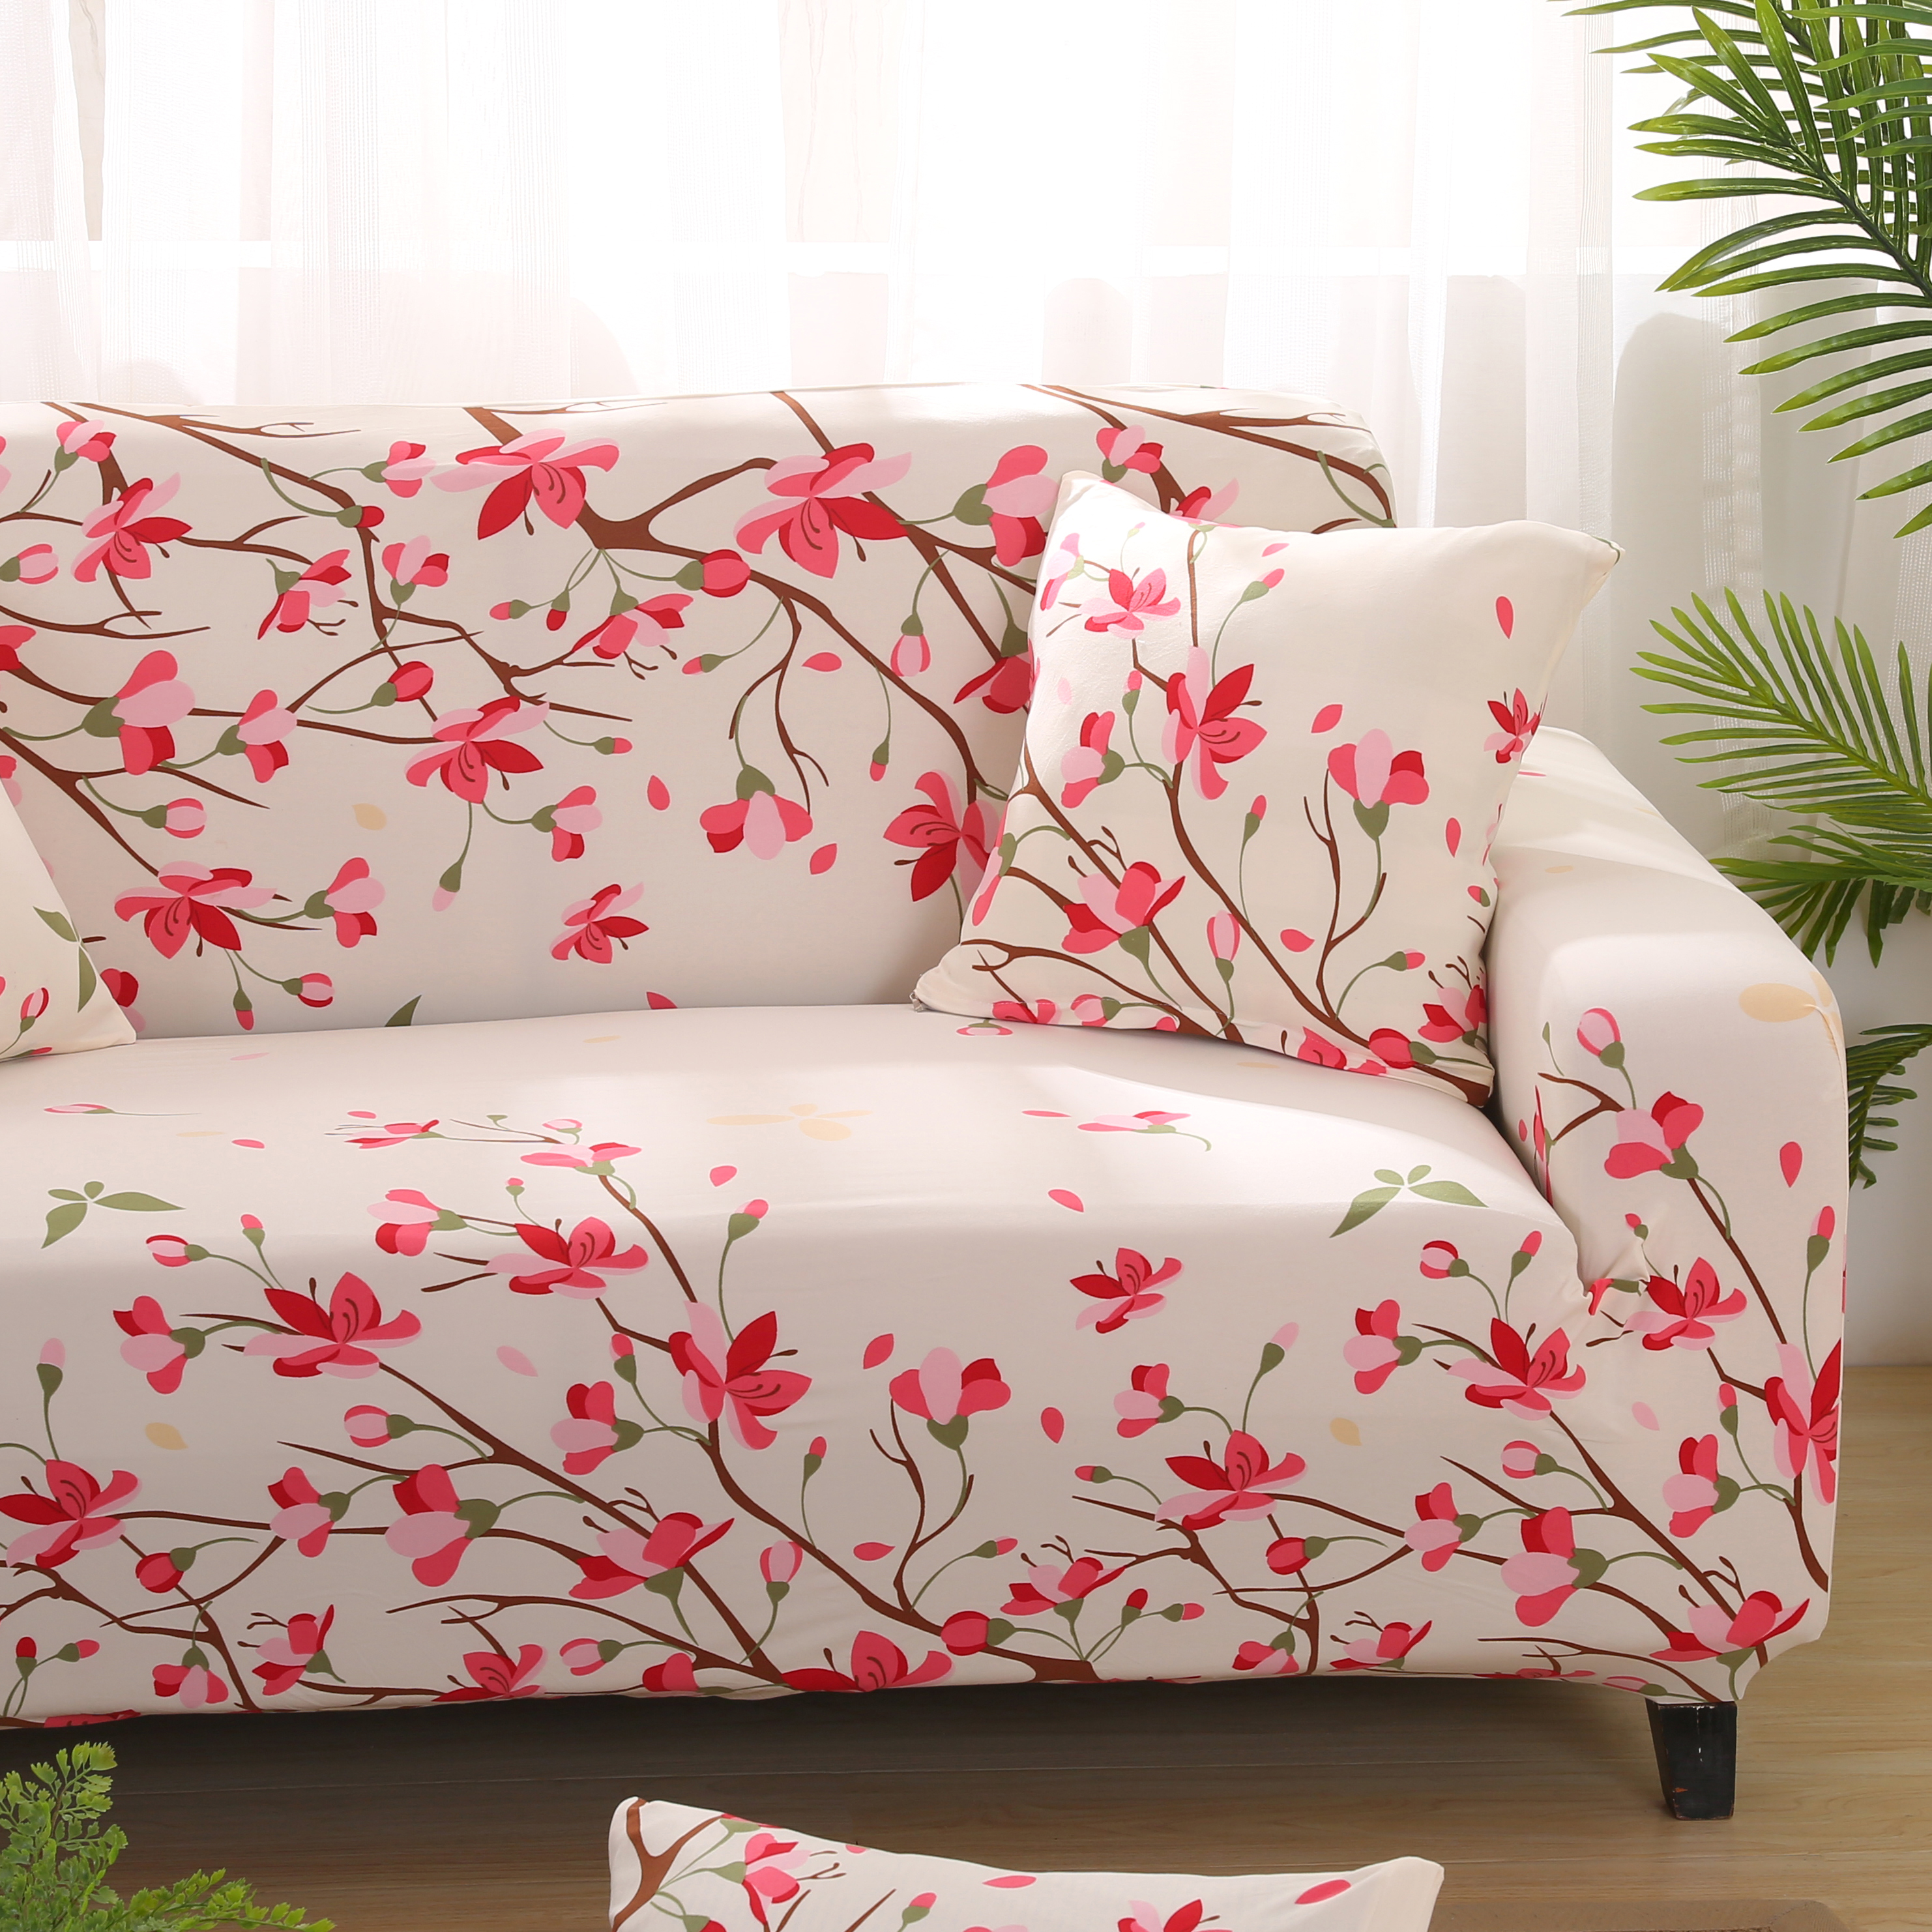 Peach Blossom Pattern Sofa Cover Stretch Elastic Sofa covers for Living Room Furniture Cover Couch Cover Fully-wrapped Anti-dust